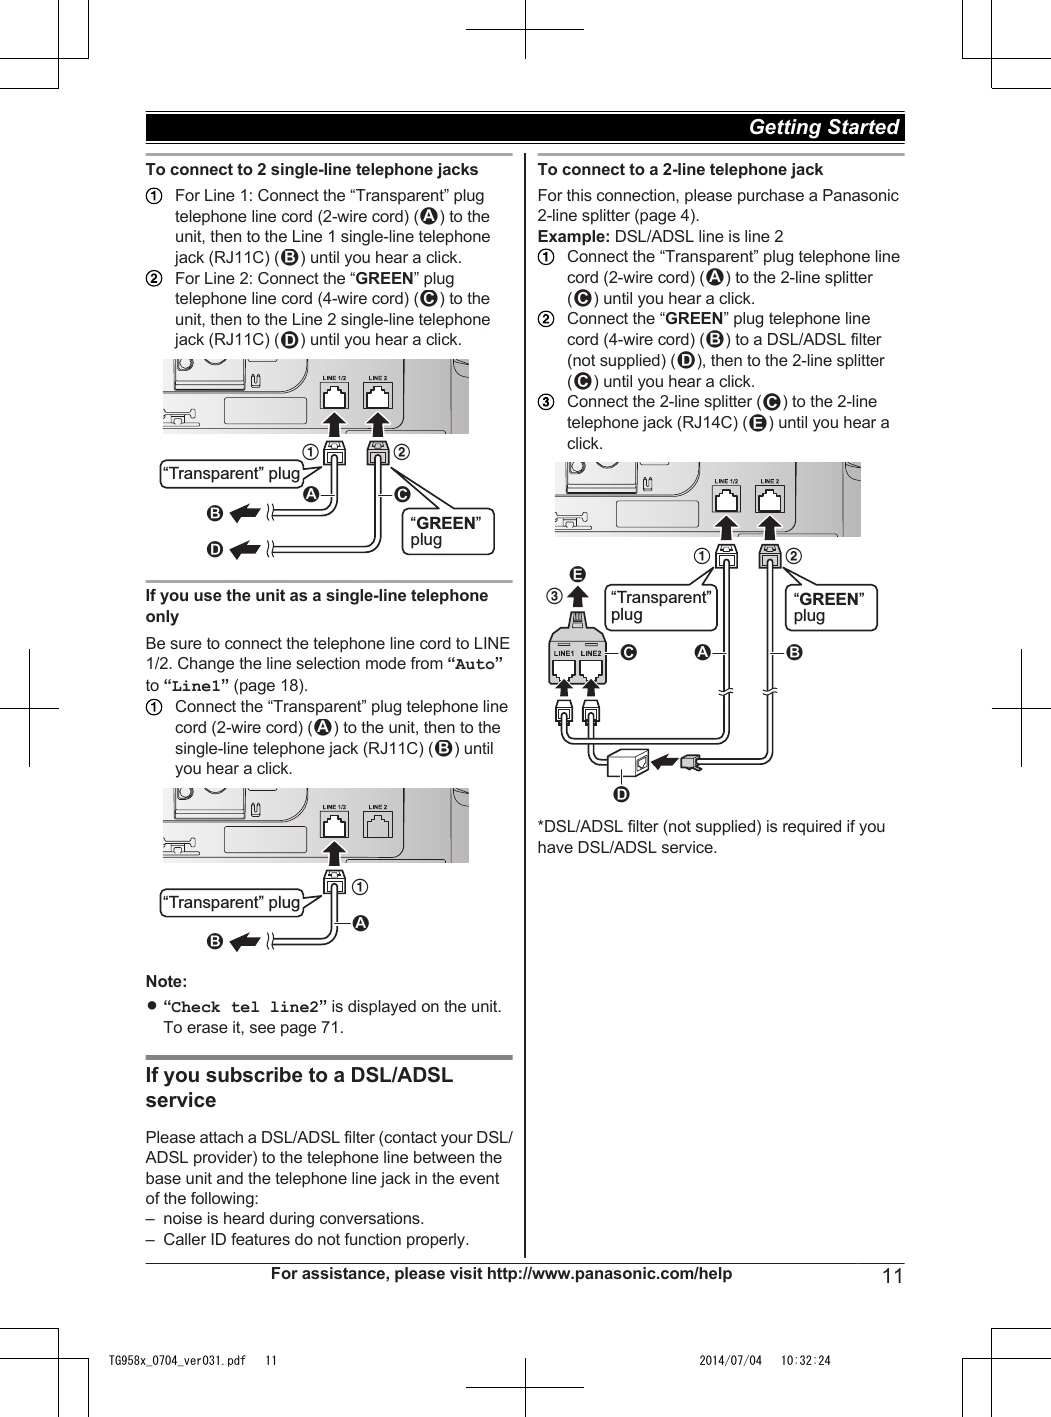 To connect to 2 single-line telephone jacksFor Line 1: Connect the “Transparent” plugtelephone line cord (2-wire cord) (1) to theunit, then to the Line 1 single-line telephonejack (RJ11C) (2) until you hear a click.For Line 2: Connect the “GREEN” plugtelephone line cord (4-wire cord) (3) to theunit, then to the Line 2 single-line telephonejack (RJ11C) (4) until you hear a click.3121“Transparent” plug“GREEN”  plug24If you use the unit as a single-line telephoneonlyBe sure to connect the telephone line cord to LINE1/2. Change the line selection mode from “Auto”to “Line1” (page 18).Connect the “Transparent” plug telephone linecord (2-wire cord) (1) to the unit, then to thesingle-line telephone jack (RJ11C) (2) untilyou hear a click.“Transparent” plug211Note:R“Check tel line2” is displayed on the unit.To erase it, see page 71.If you subscribe to a DSL/ADSLservicePlease attach a DSL/ADSL filter (contact your DSL/ADSL provider) to the telephone line between thebase unit and the telephone line jack in the eventof the following:– noise is heard during conversations.– Caller ID features do not function properly.To connect to a 2-line telephone jackFor this connection, please purchase a Panasonic2-line splitter (page 4).Example: DSL/ADSL line is line 2Connect the “Transparent” plug telephone linecord (2-wire cord) (1) to the 2-line splitter(3) until you hear a click.Connect the “GREEN” plug telephone linecord (4-wire cord) (2) to a DSL/ADSL filter(not supplied) (4), then to the 2-line splitter(3) until you hear a click.Connect the 2-line splitter (3) to the 2-linetelephone jack (RJ14C) (5) until you hear aclick.1254213“GREEN”  plug“Transparent”  plug3*DSL/ADSL filter (not supplied) is required if youhave DSL/ADSL service.For assistance, please visit http://www.panasonic.com/help 11Getting Started TG958x_0704_ver031.pdf   11 2014/07/04   10:32:24